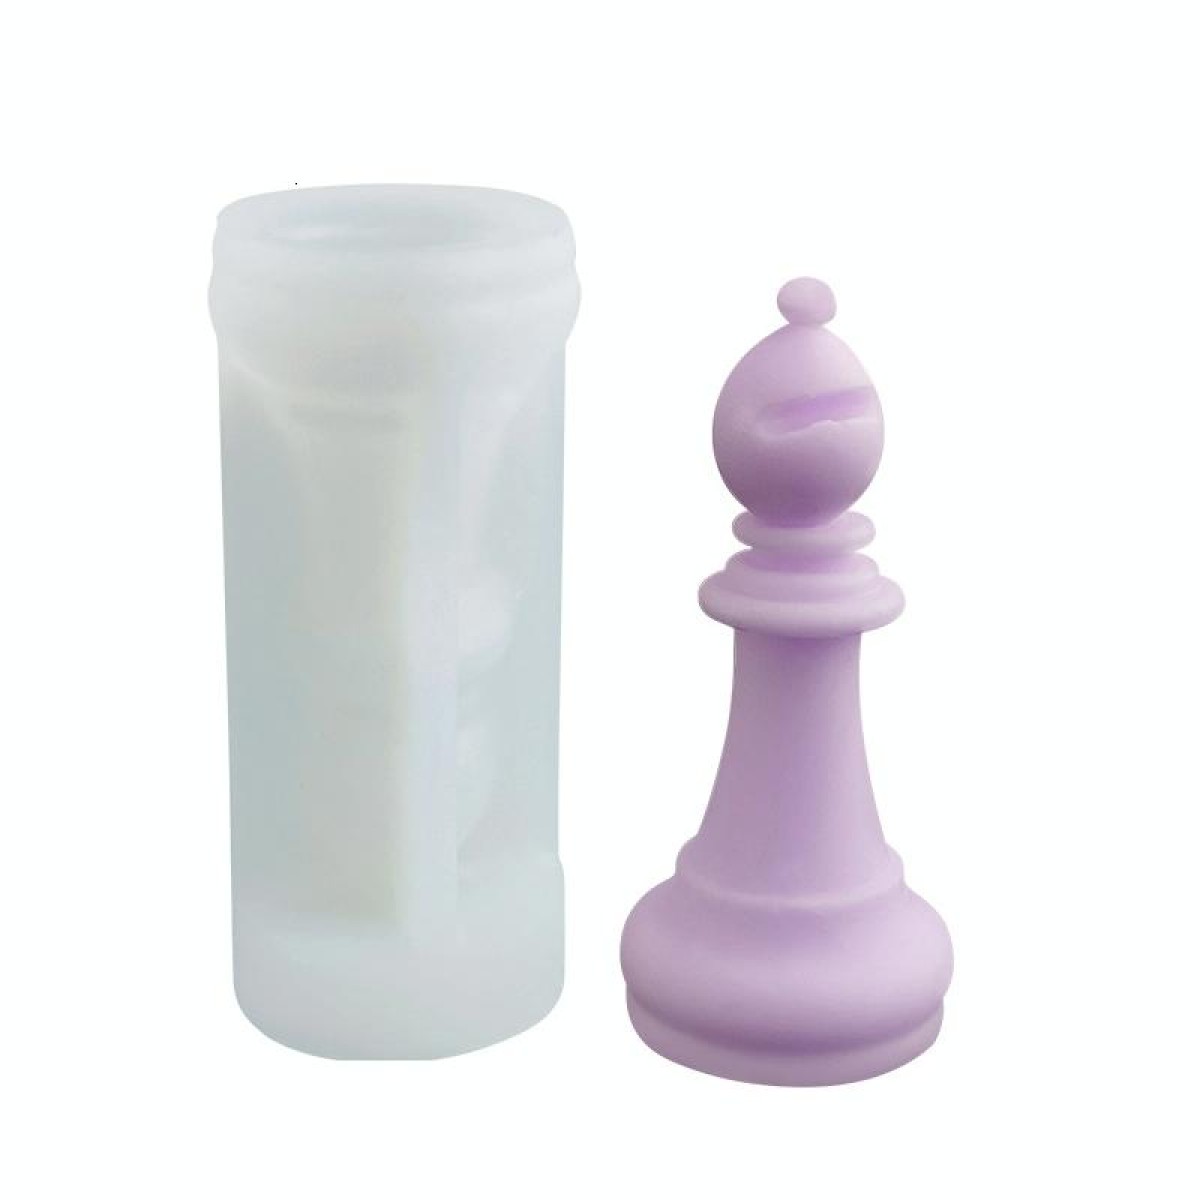 2 PCS Chess Aromatherapy Candle Silicone Mold Crystal Epoxy Mold, Specification: Bishop LZ-19